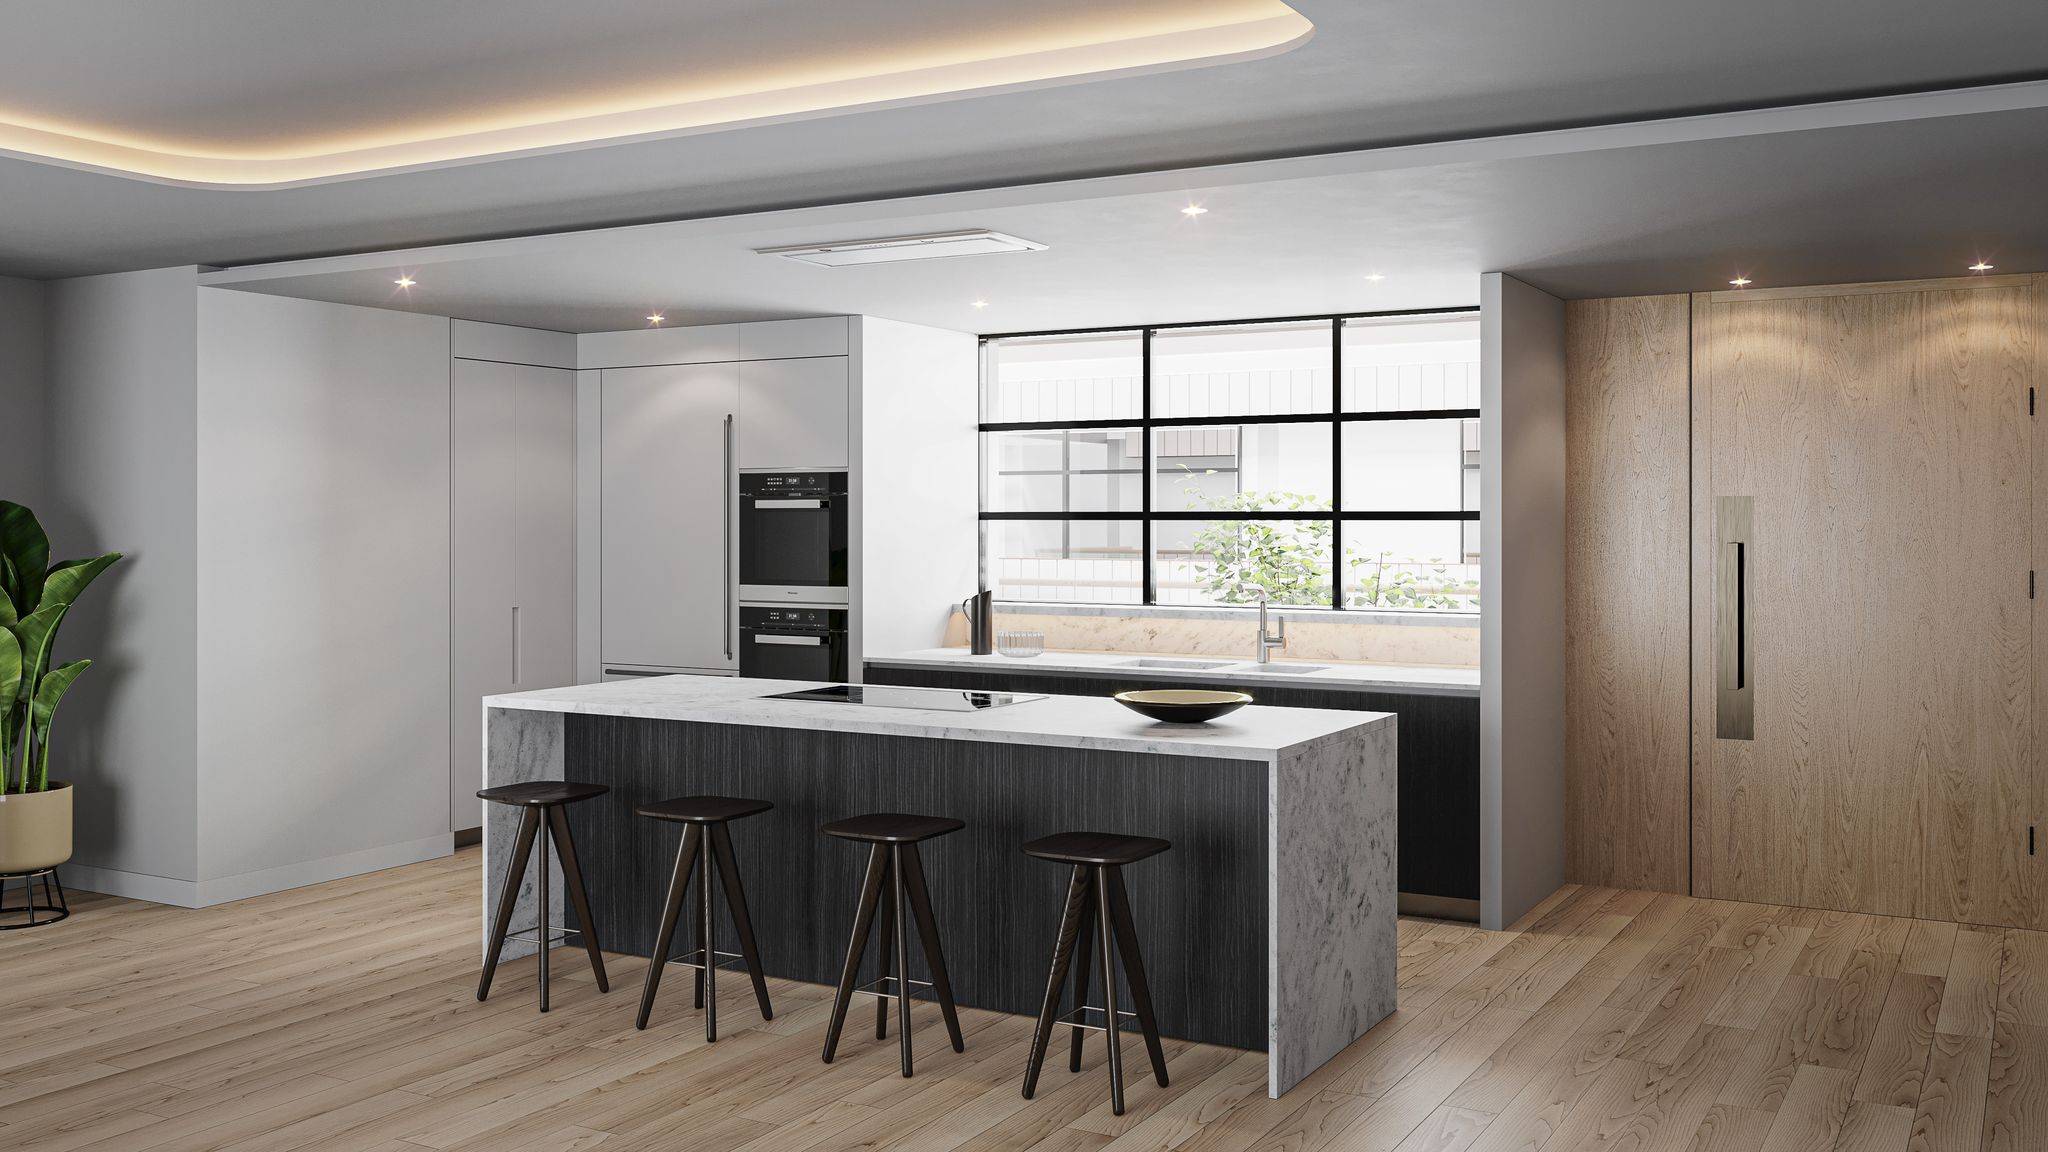 A first-floor two-bedroom, two-bathroom west facing apartment at the highly anticipated Marylebone Square Residences, set to be built in the heart of Marylebone Village.